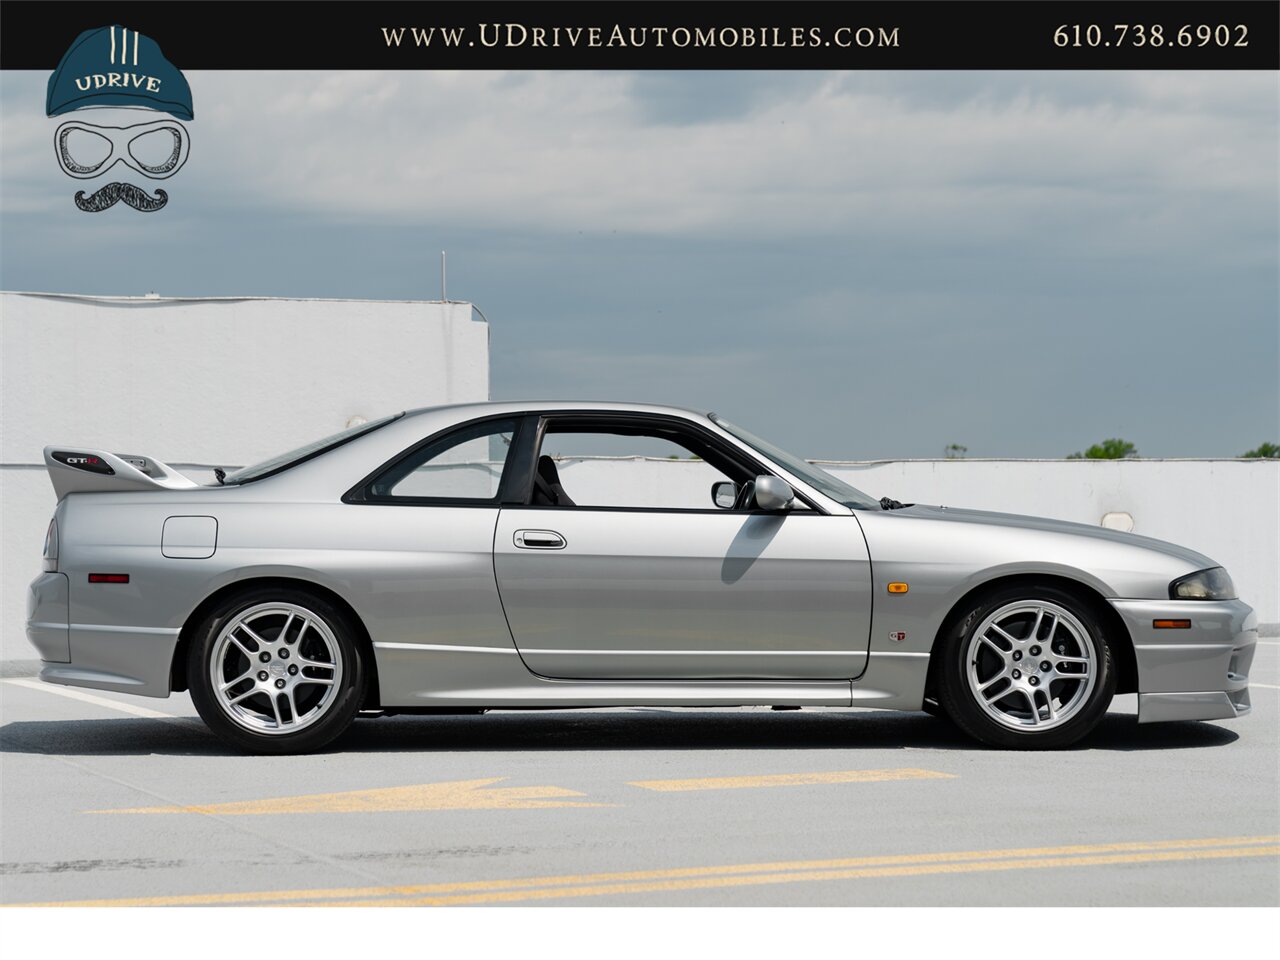 1997 Nissan Skyline GT-R R33 28k Miles Collector Grade  Motorex Legally Imported Titled Federalized Service History - Photo 15 - West Chester, PA 19382